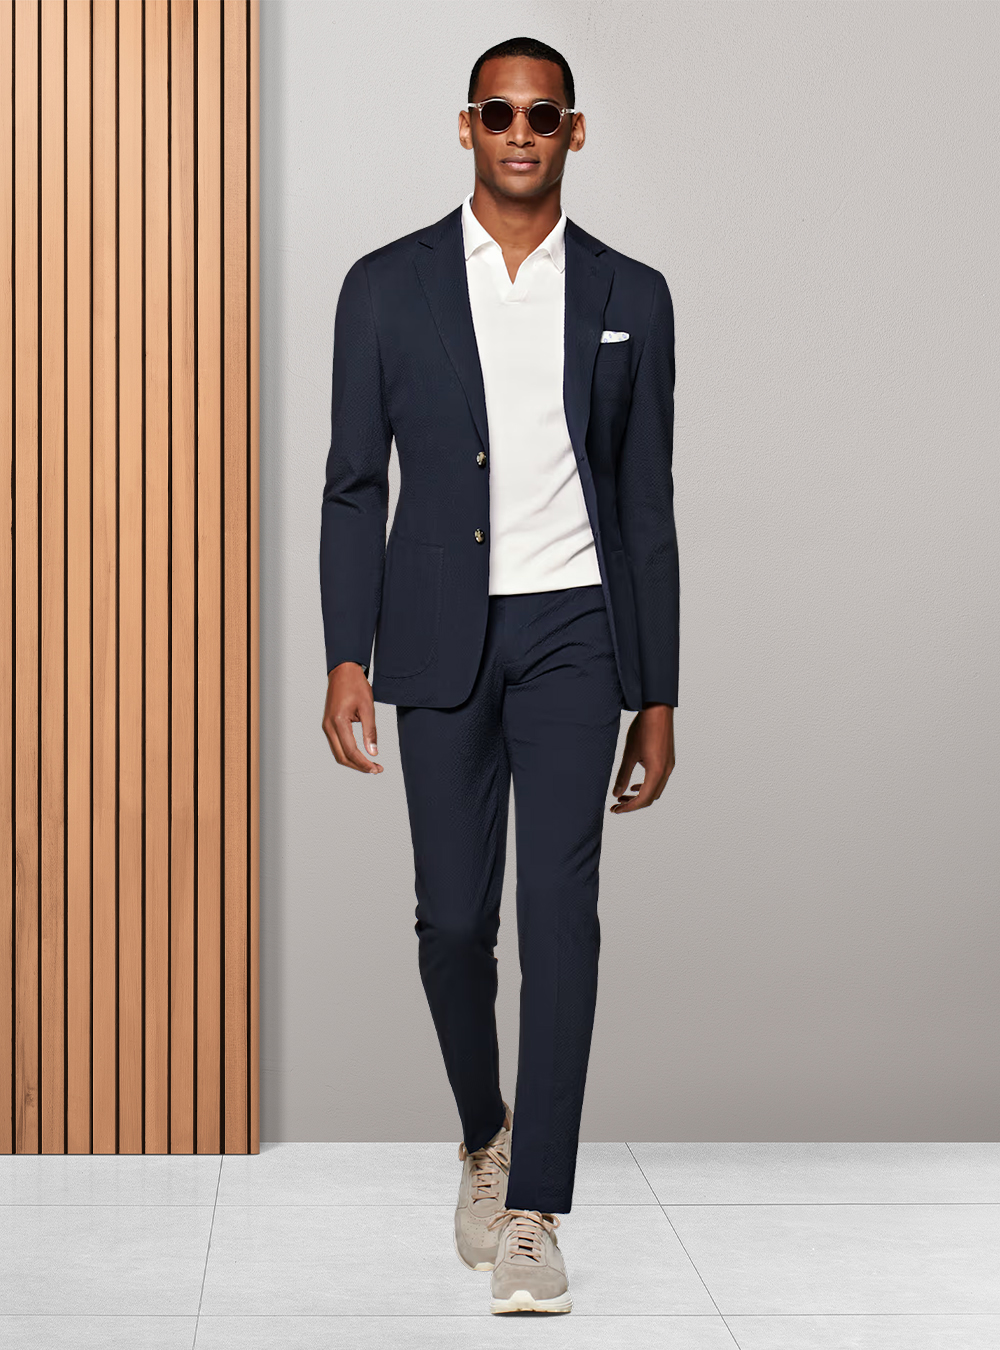 navy blue suit, white polo t-shirt, and grey sneakers